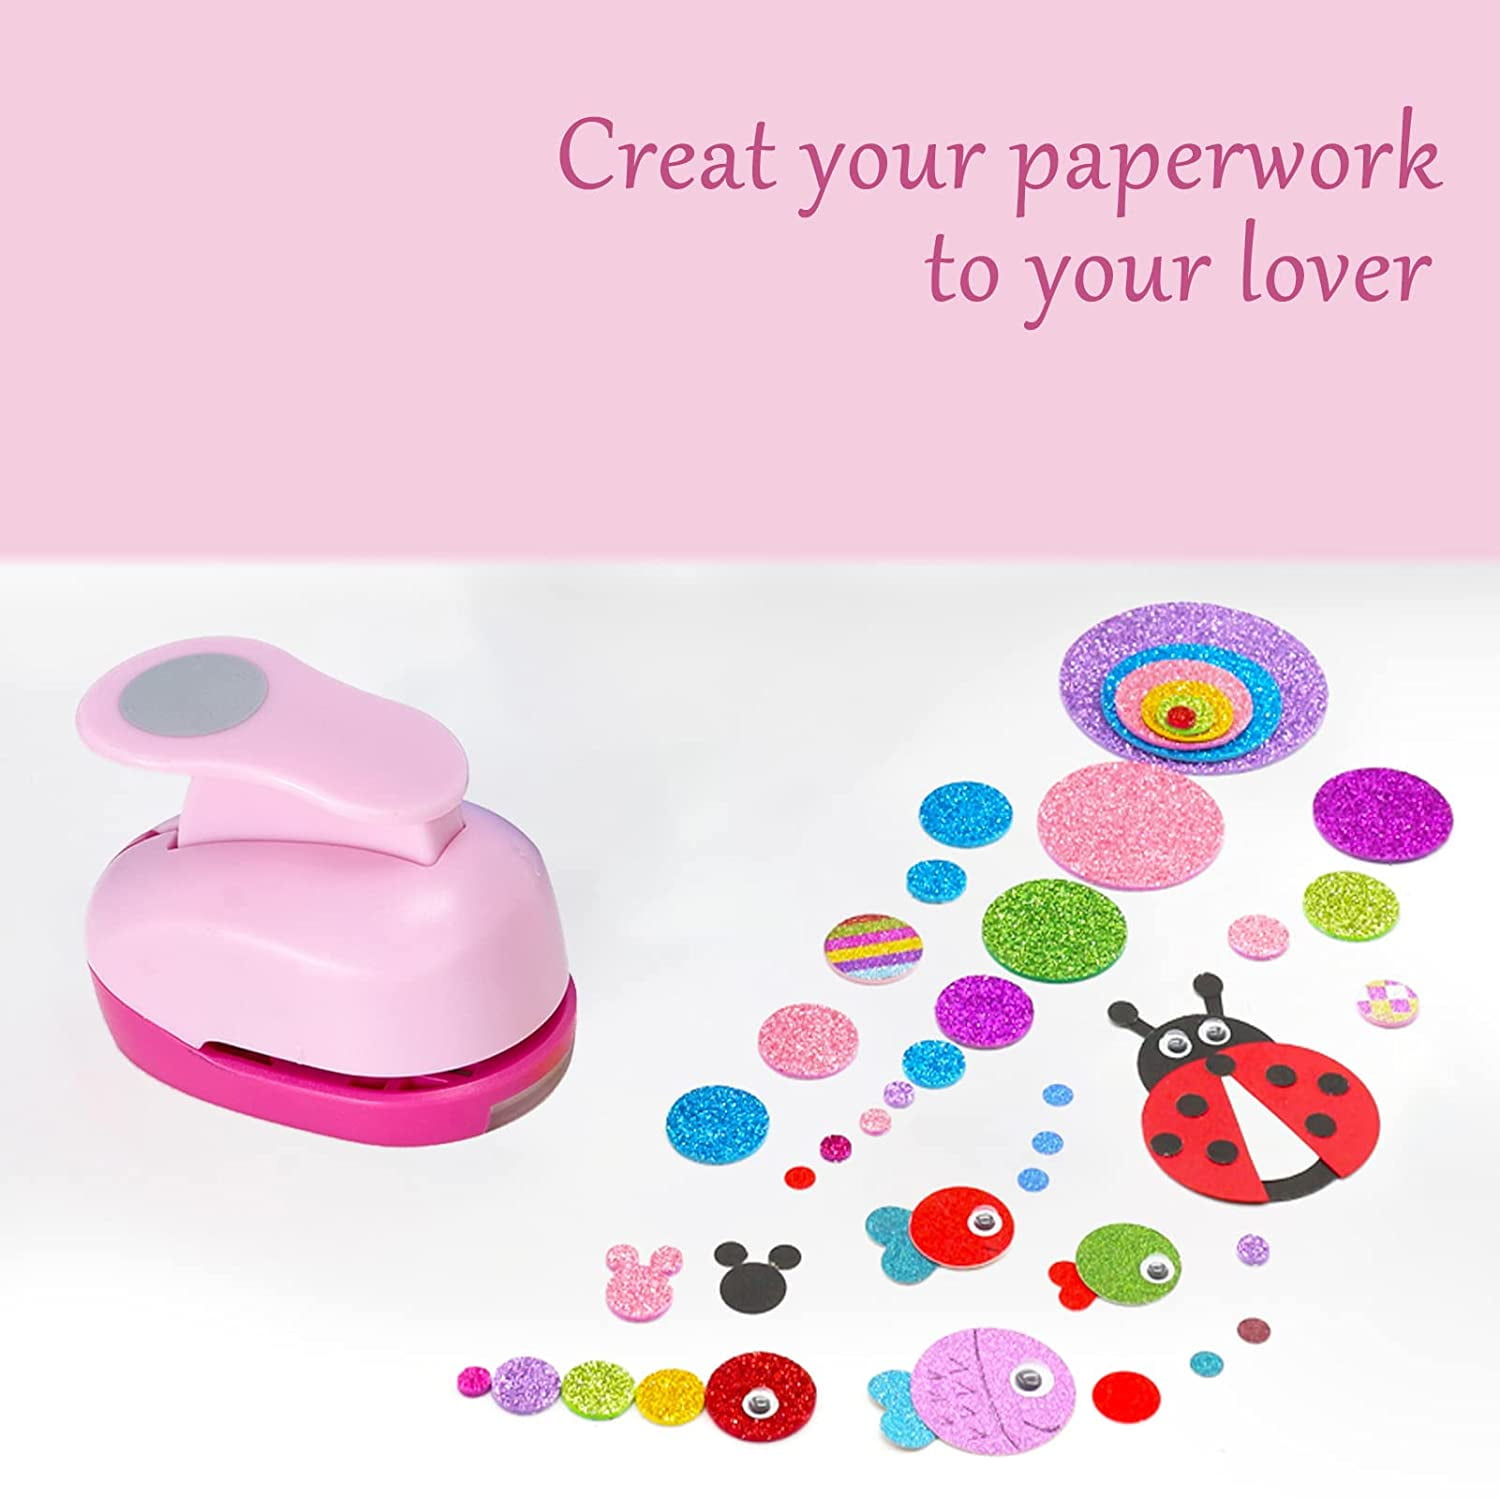 WSRRDRECVHi Circle Paper Punch,1Pcs Handmade Scrapbook Paper Puncher, Craft  Hole Punch for Making Scrapbook Pages, Memory Books, Card Making, Journals,  Gift Tags, Homemade Confetti(Random Color) Y9H0 